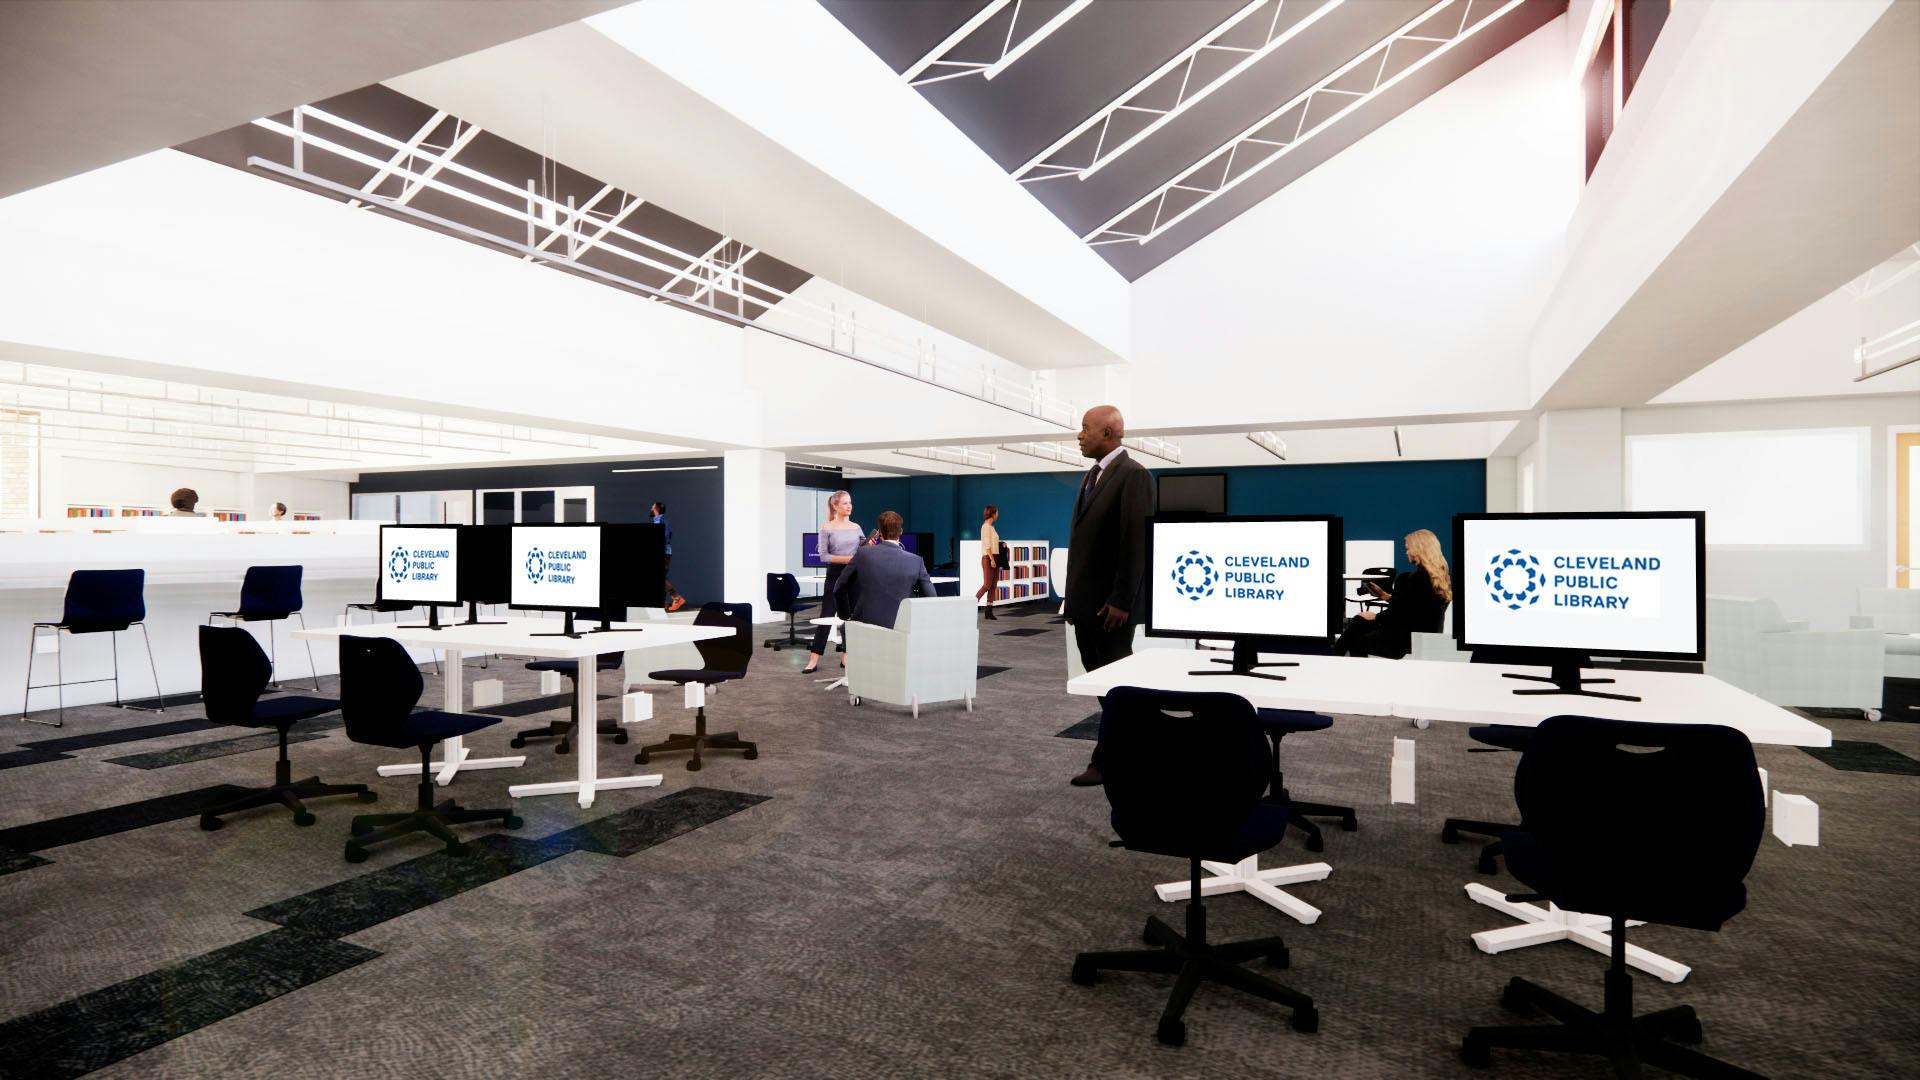 rendering of library interior showing multiple computer stations